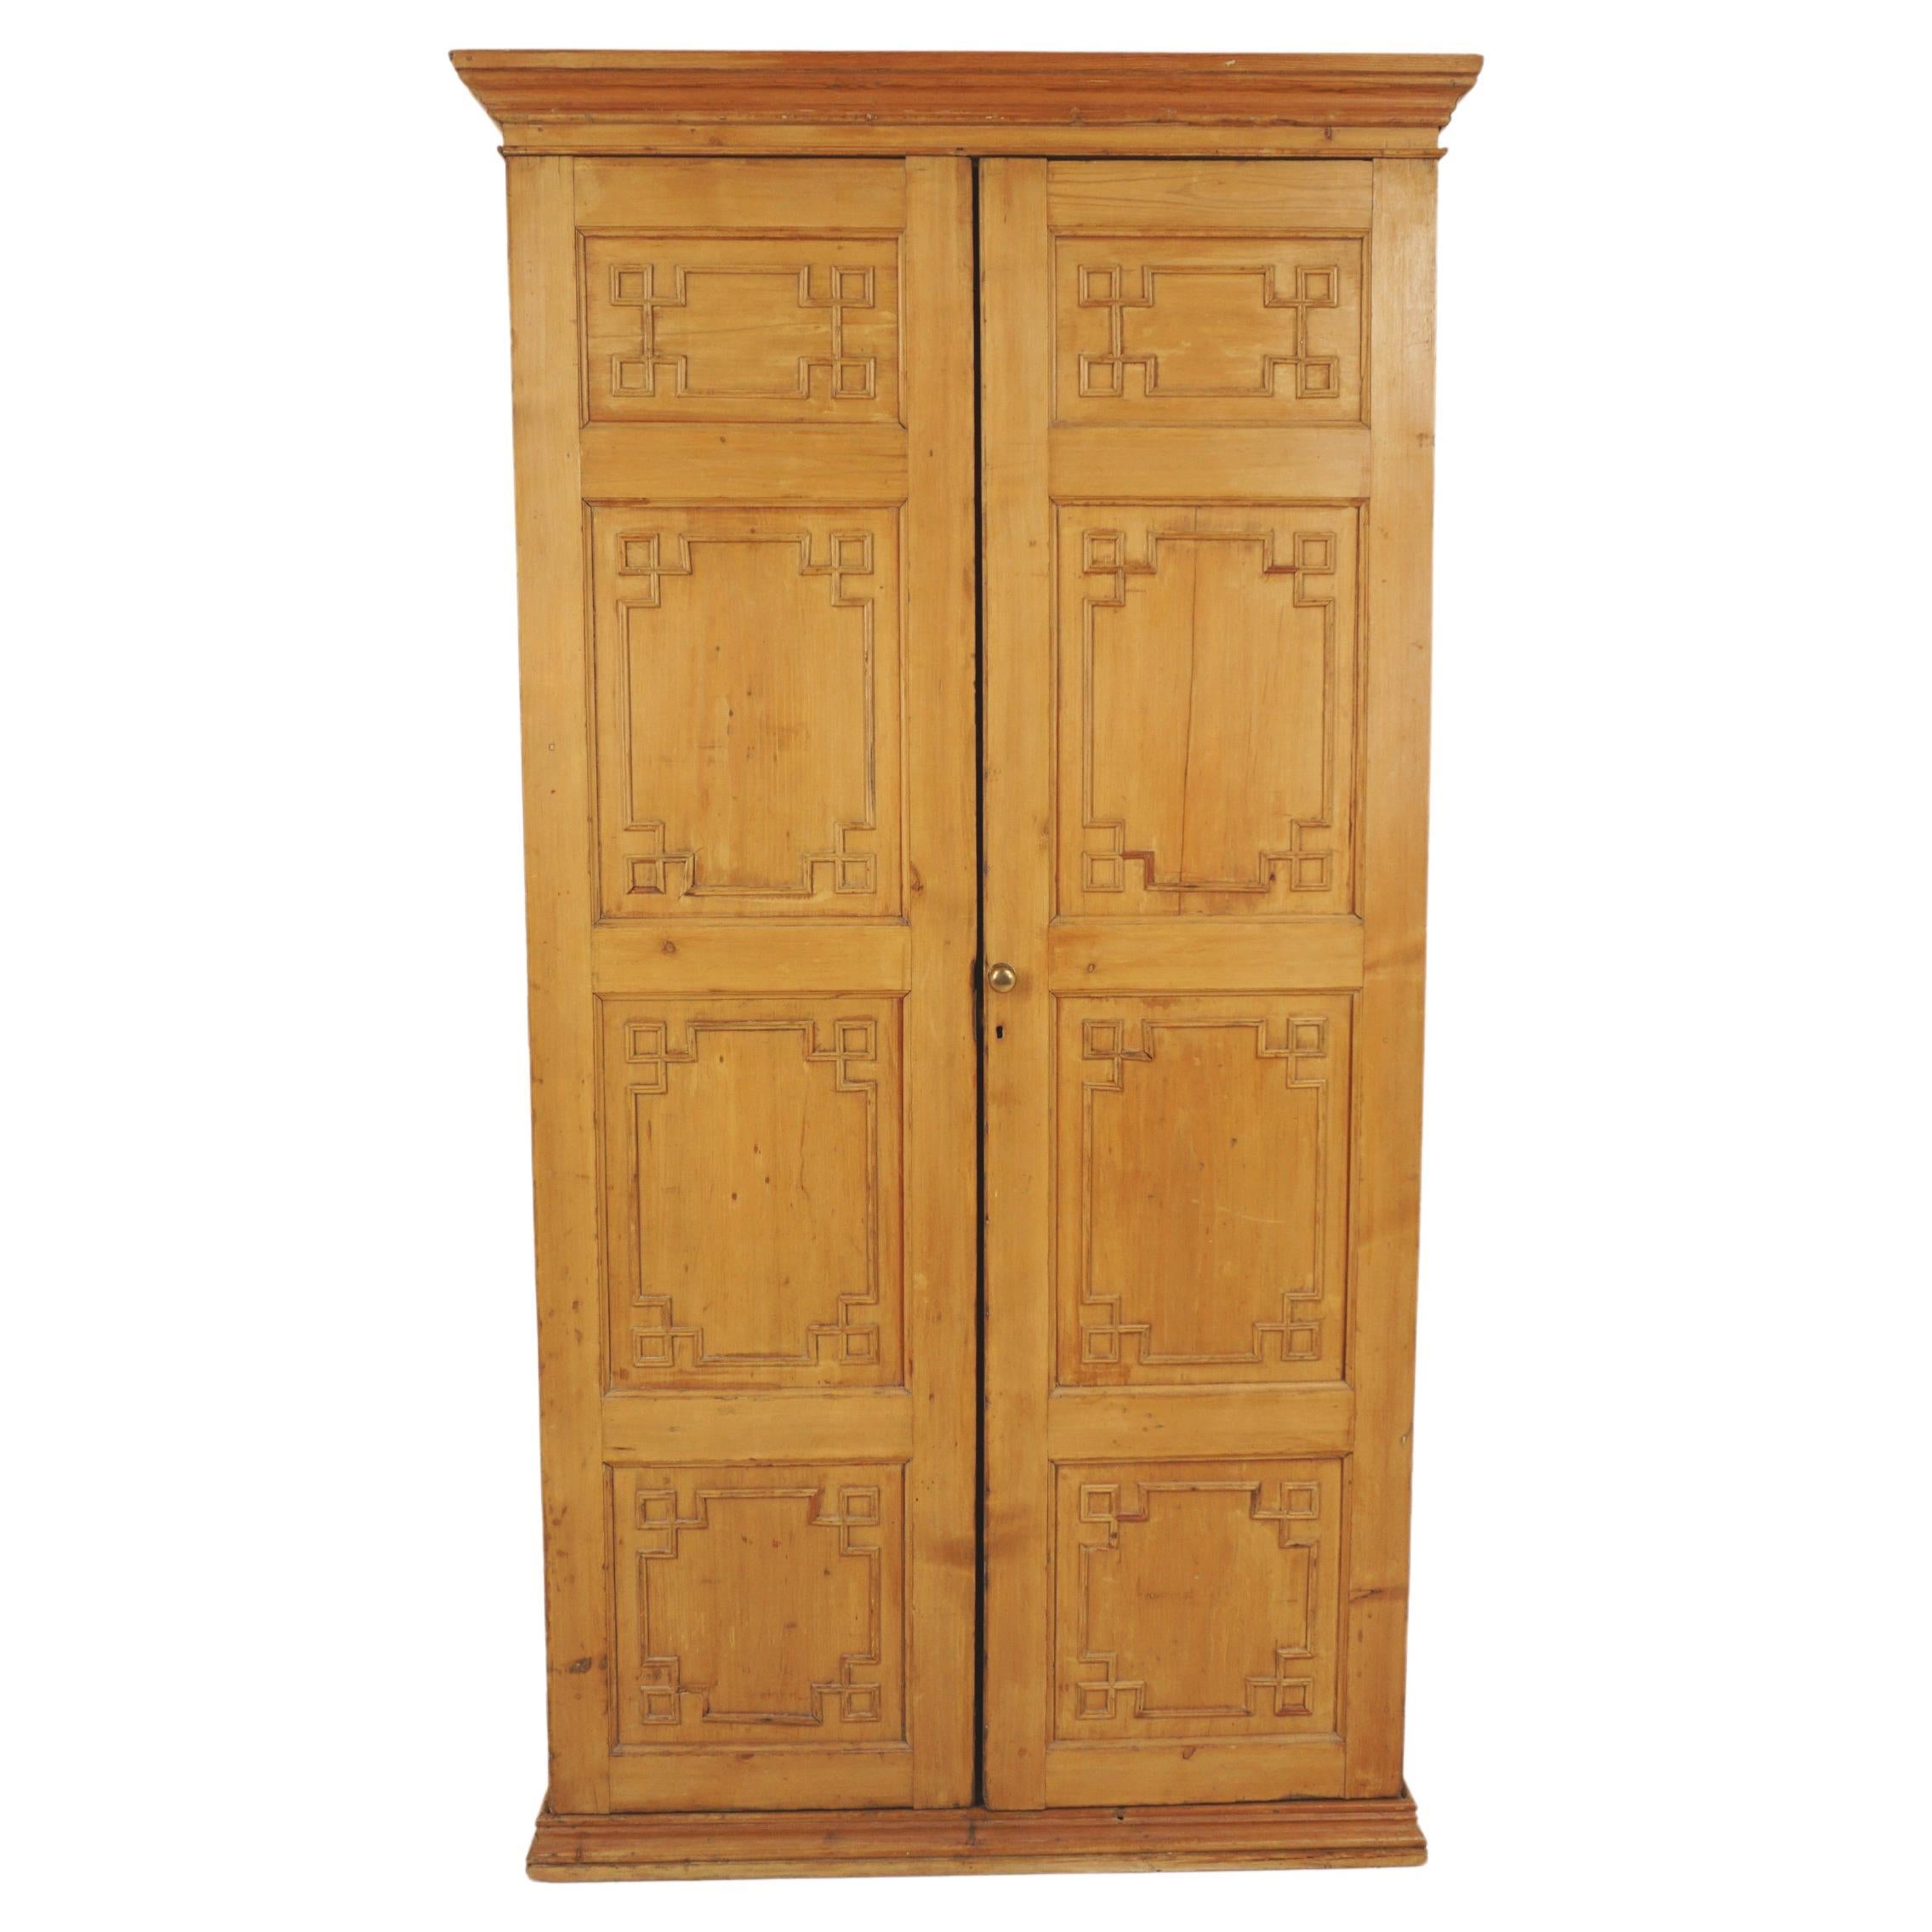 Antique French Pine Armoire, Wardrobe Closet, France 1880, B2879A